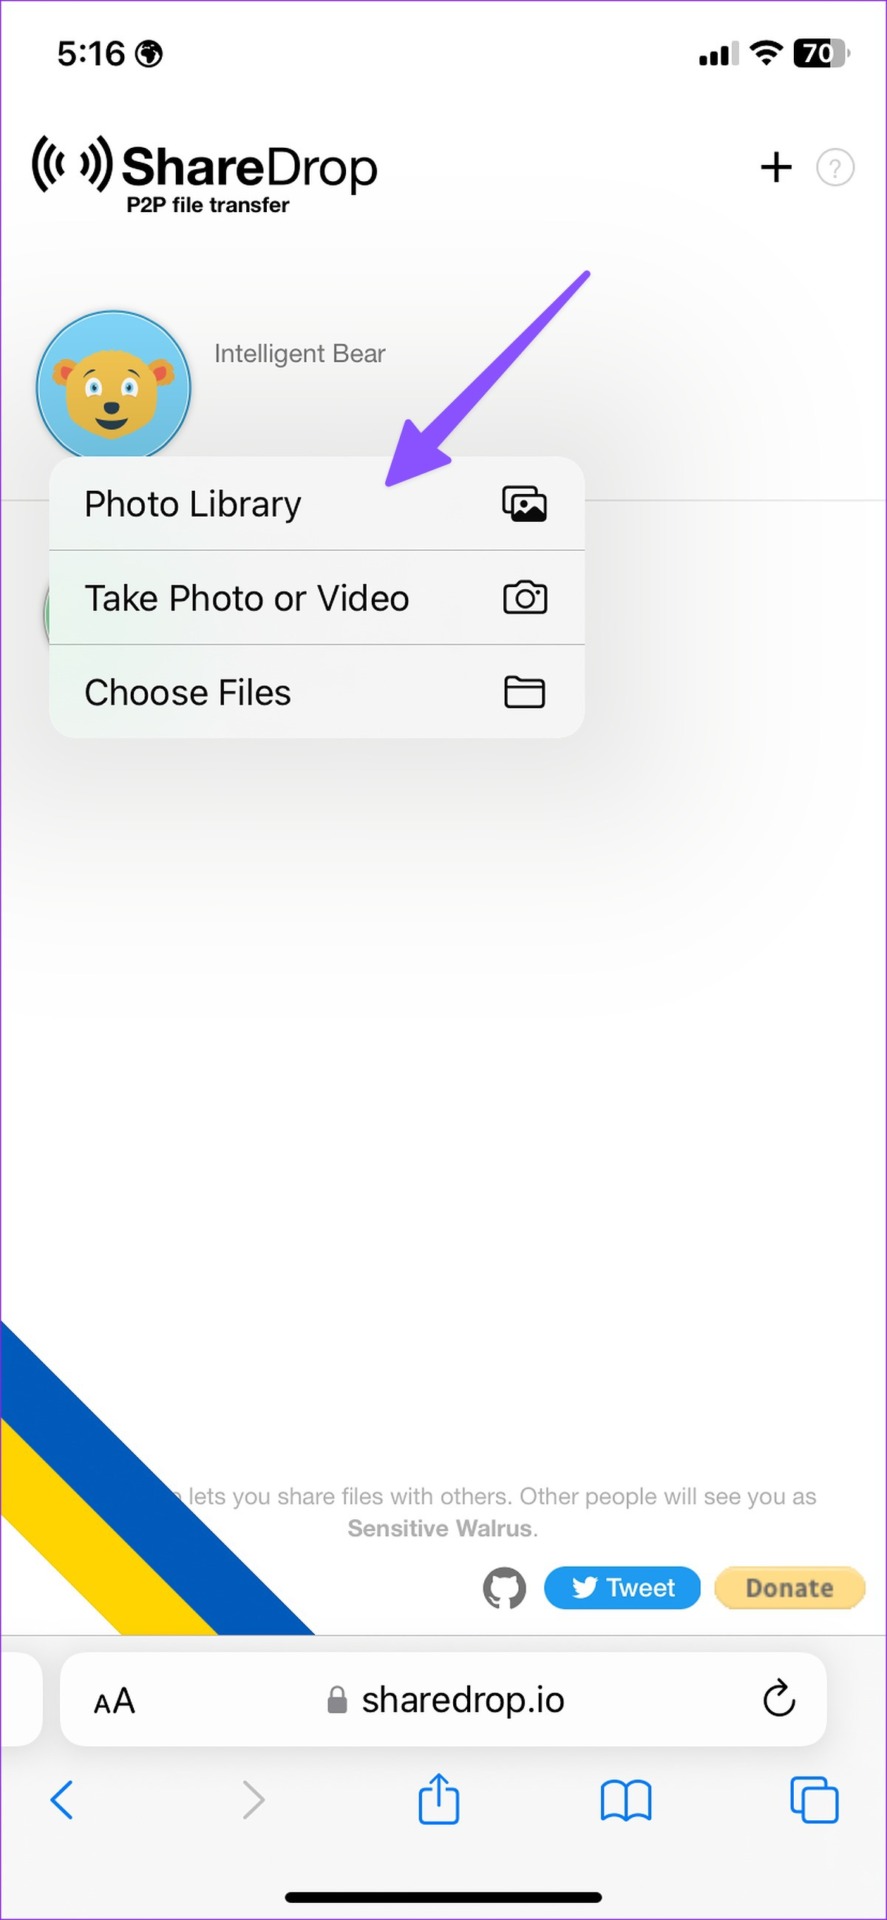 select photos on iPhone